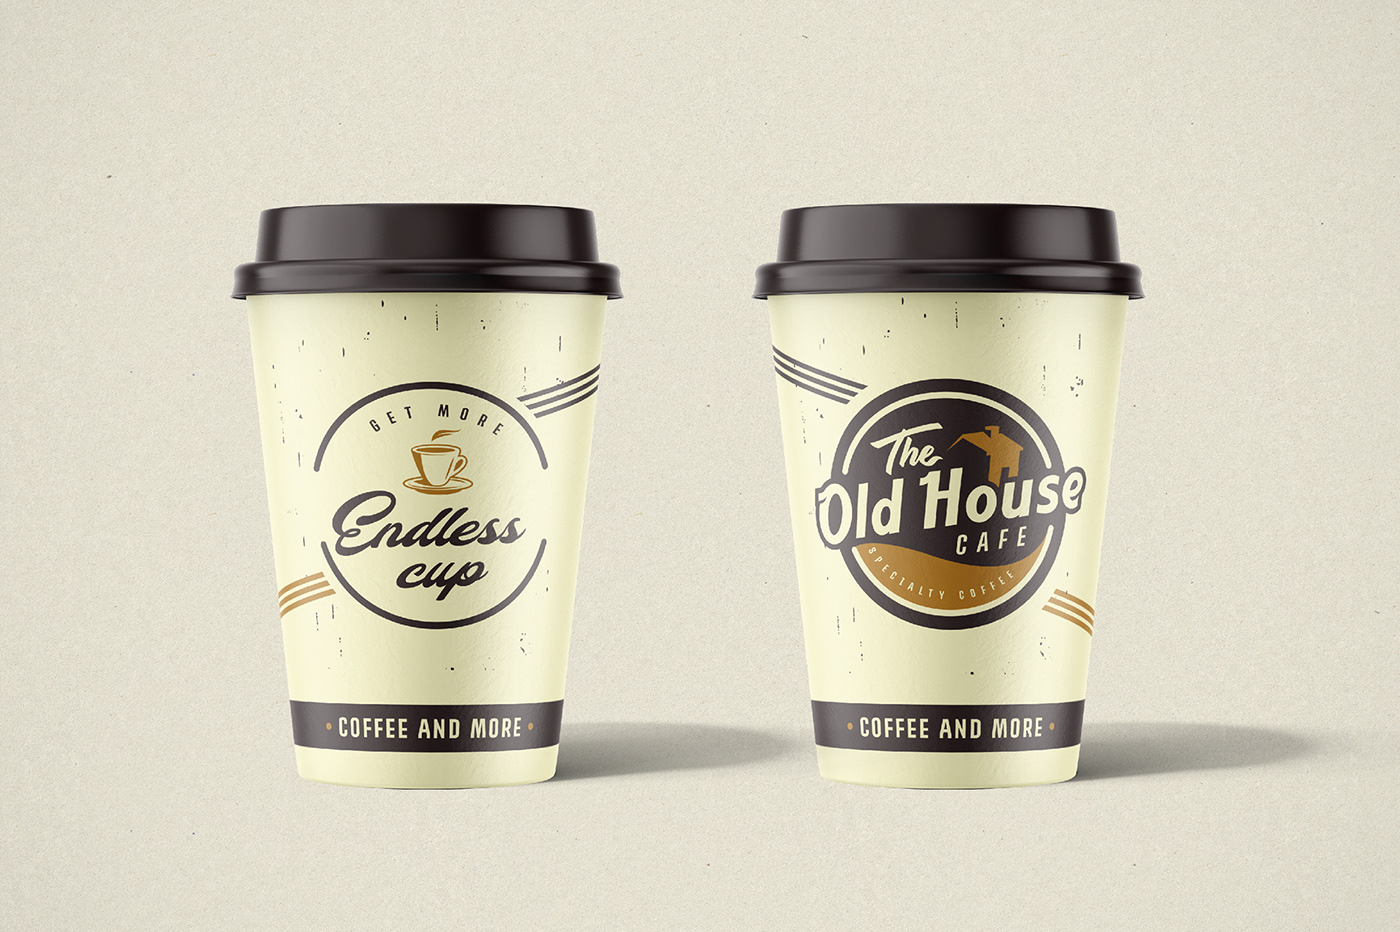 cafe Coffee 70s hot drinks Sandwiches old house branding  Packaging drinks